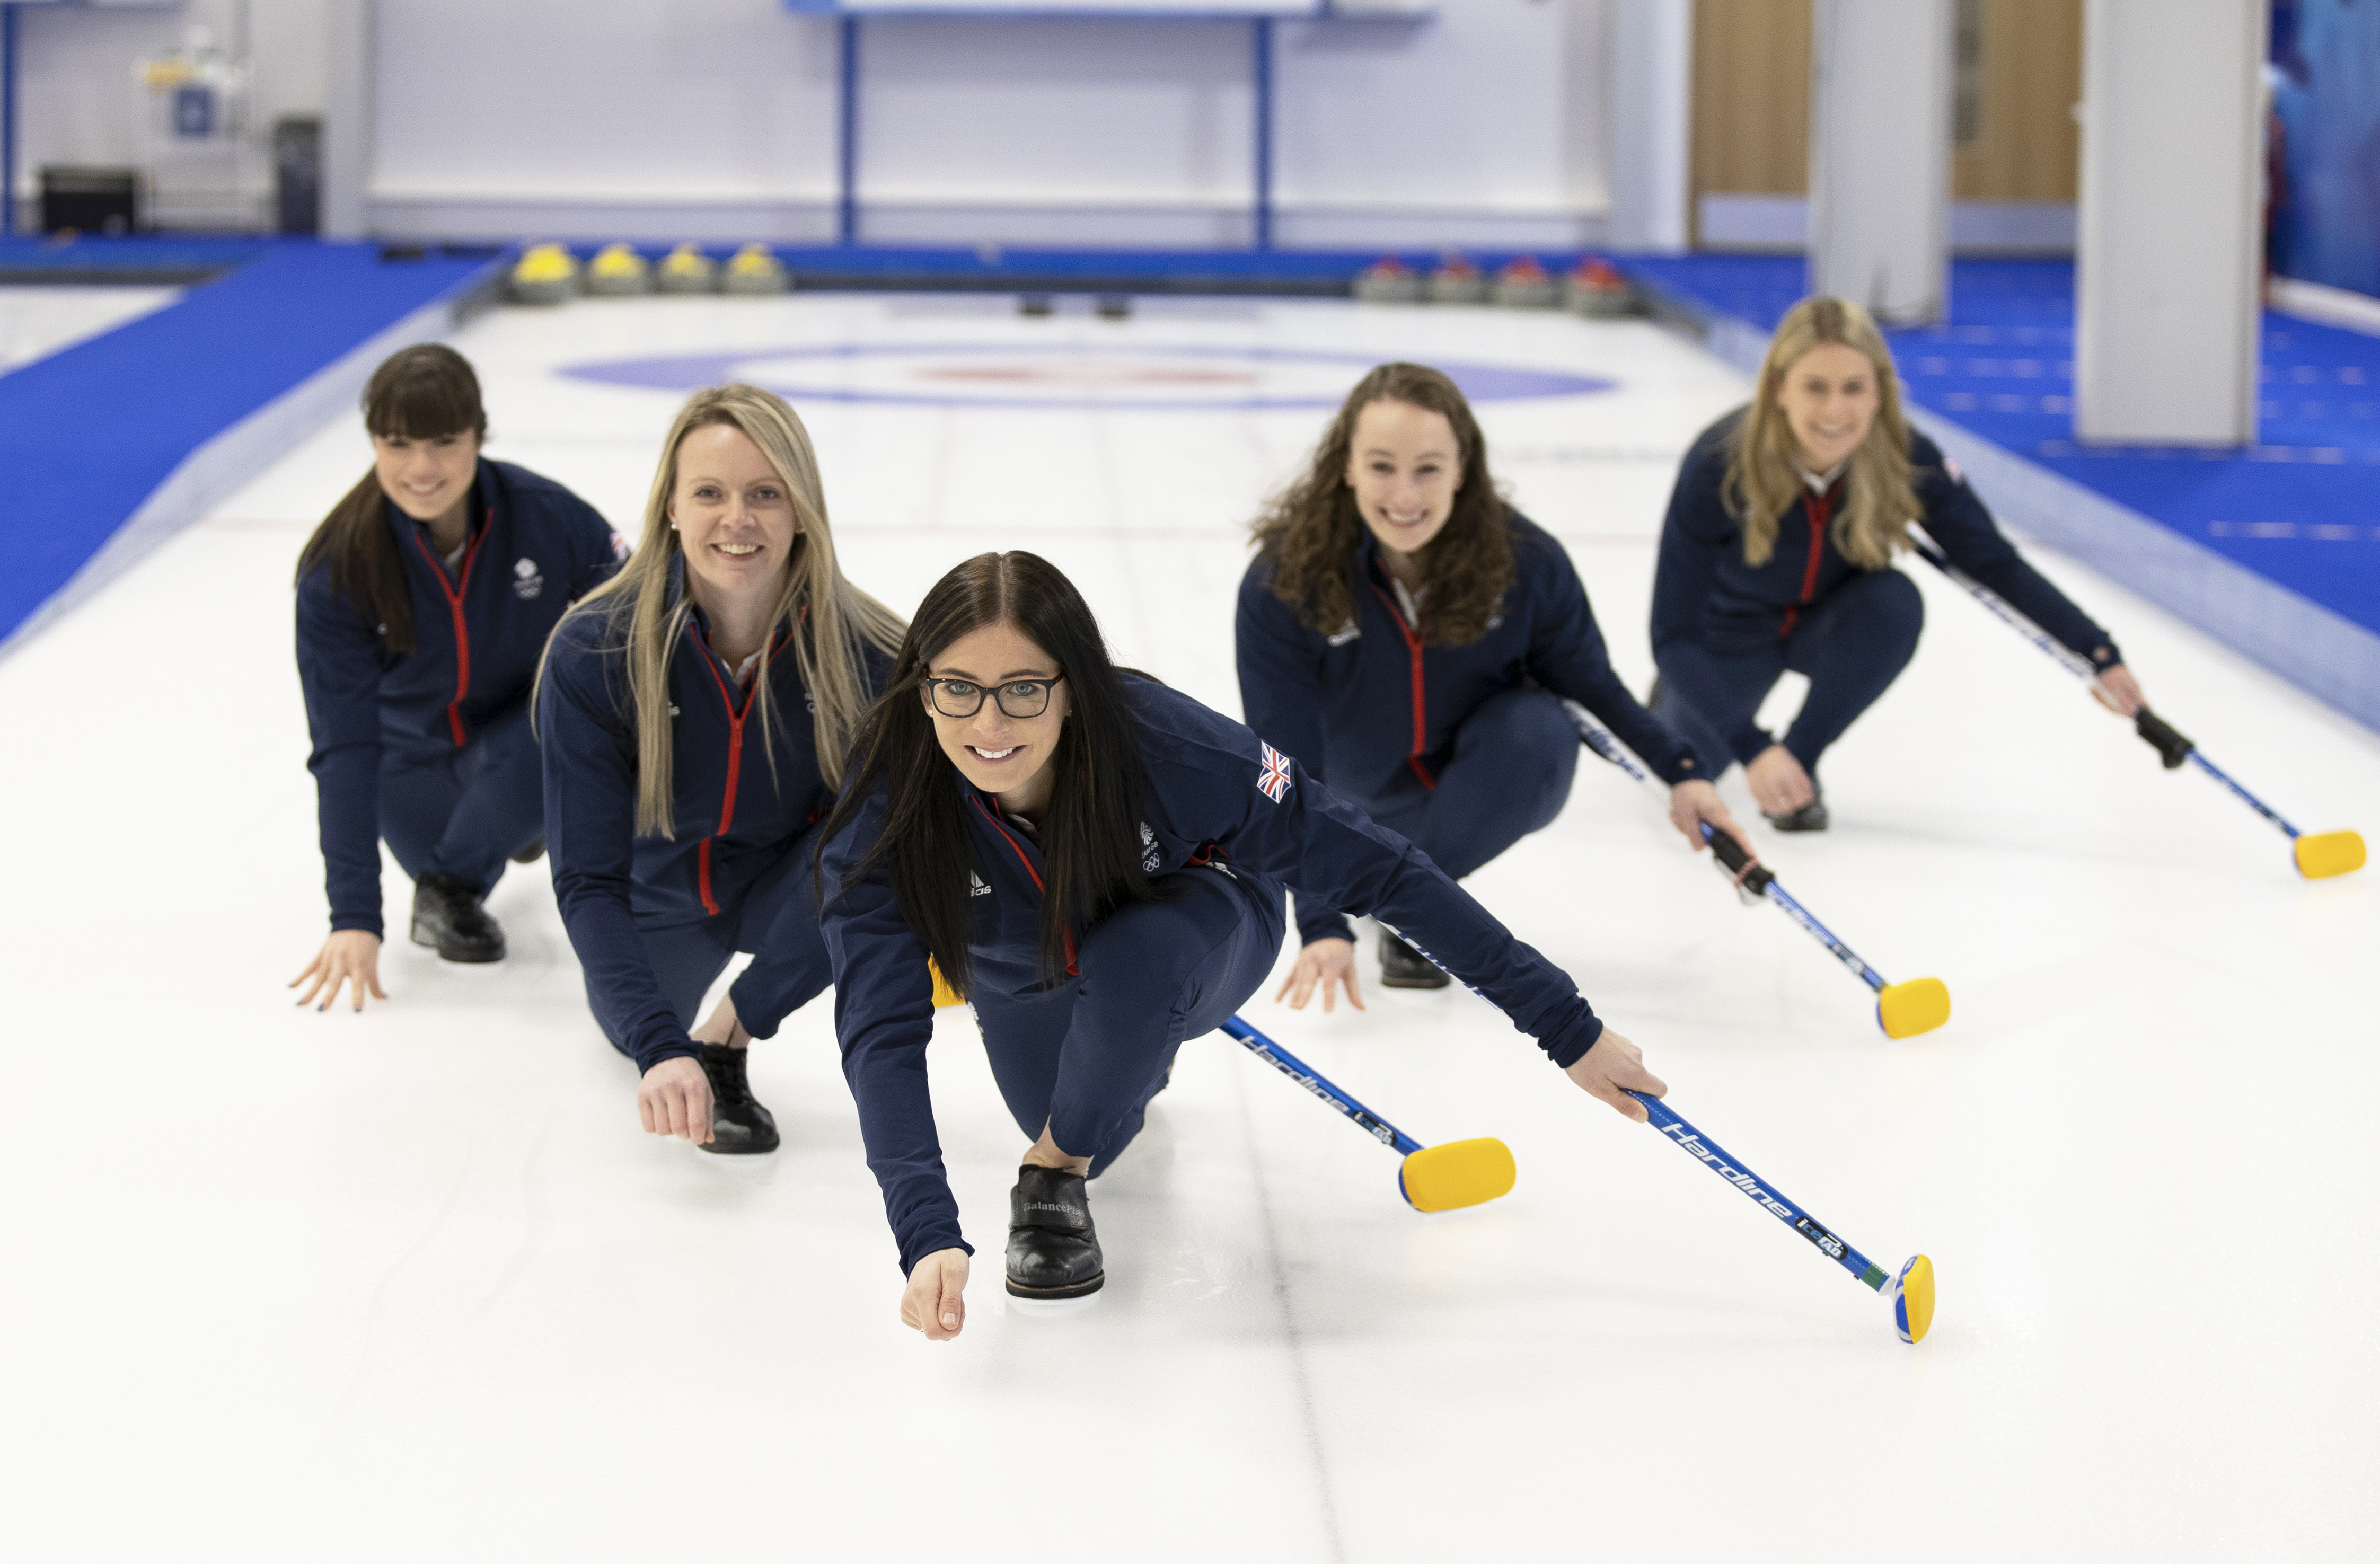 Dumfries and Galloway woman selected for Team GB curling squad